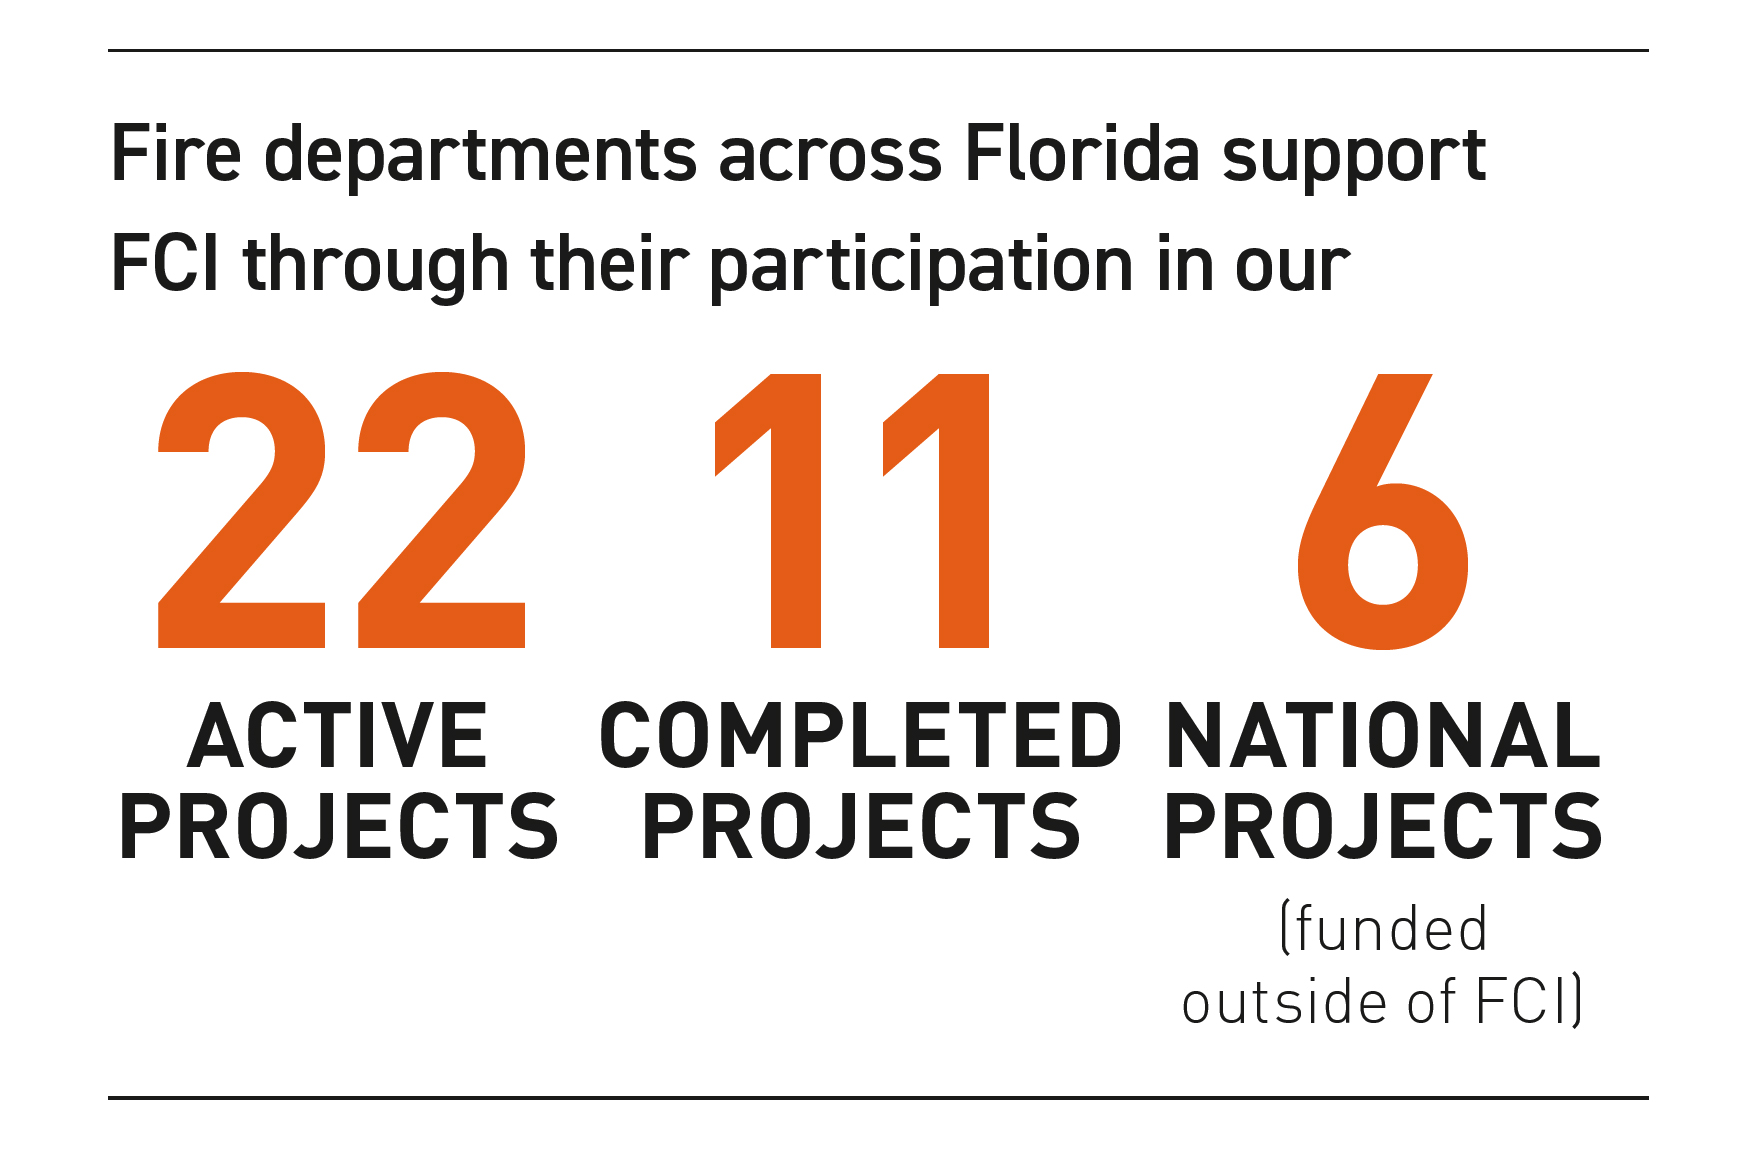 Sylvester's Firefighter Cancer Initiative has 22 active projects, 11 completed projects and 6 national projects